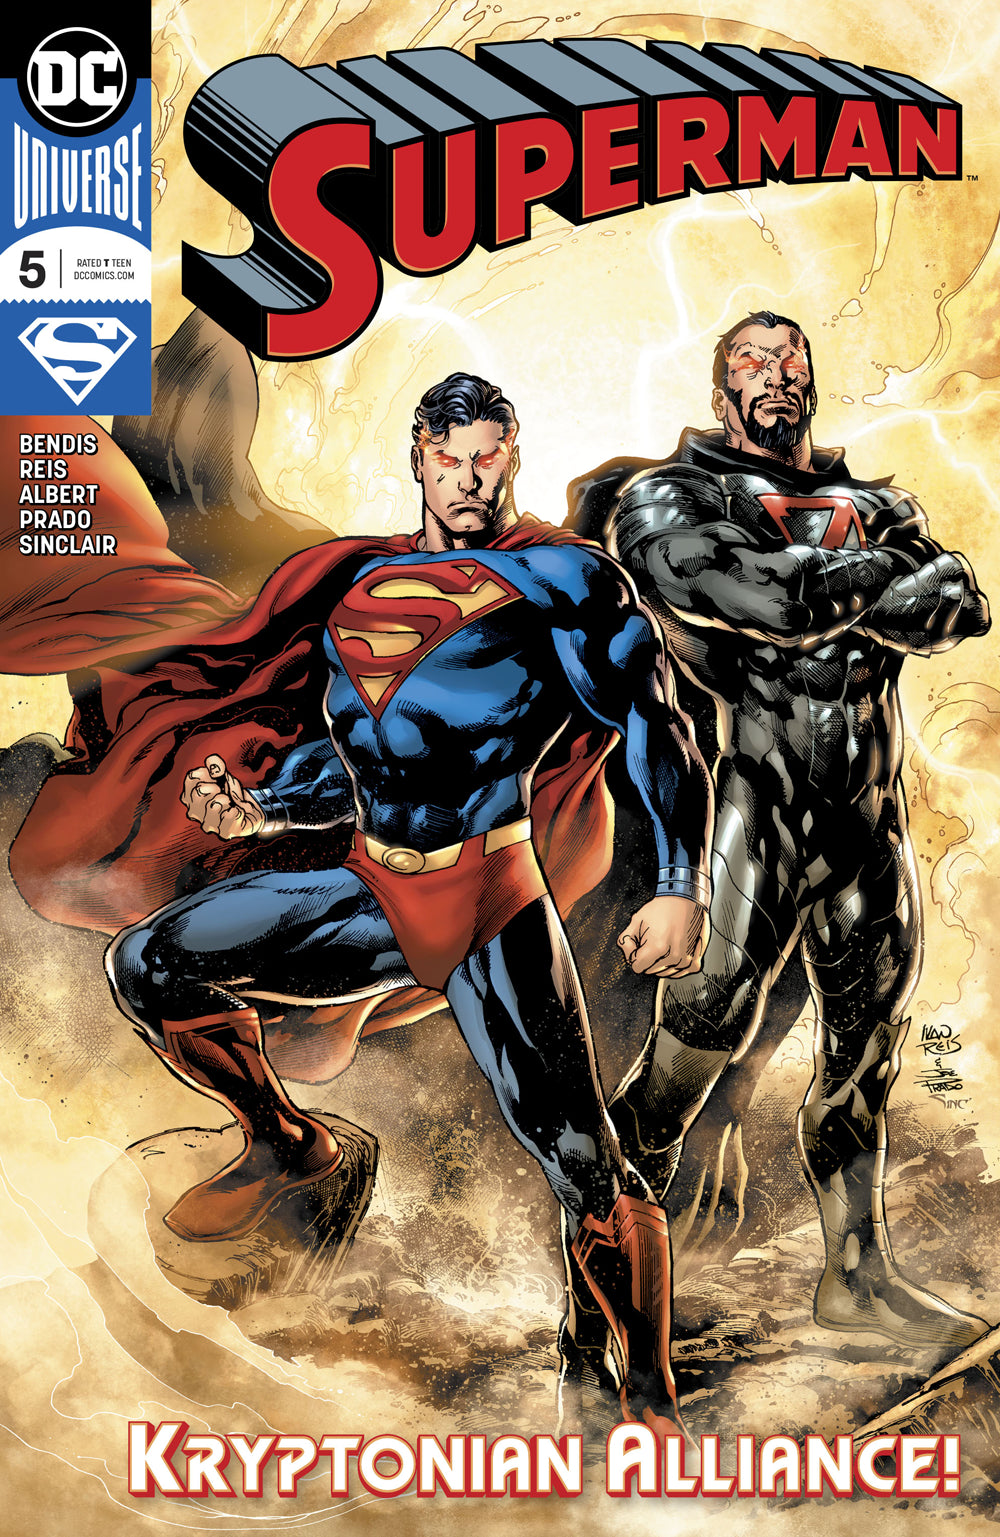 SUPERMAN #5 COVER